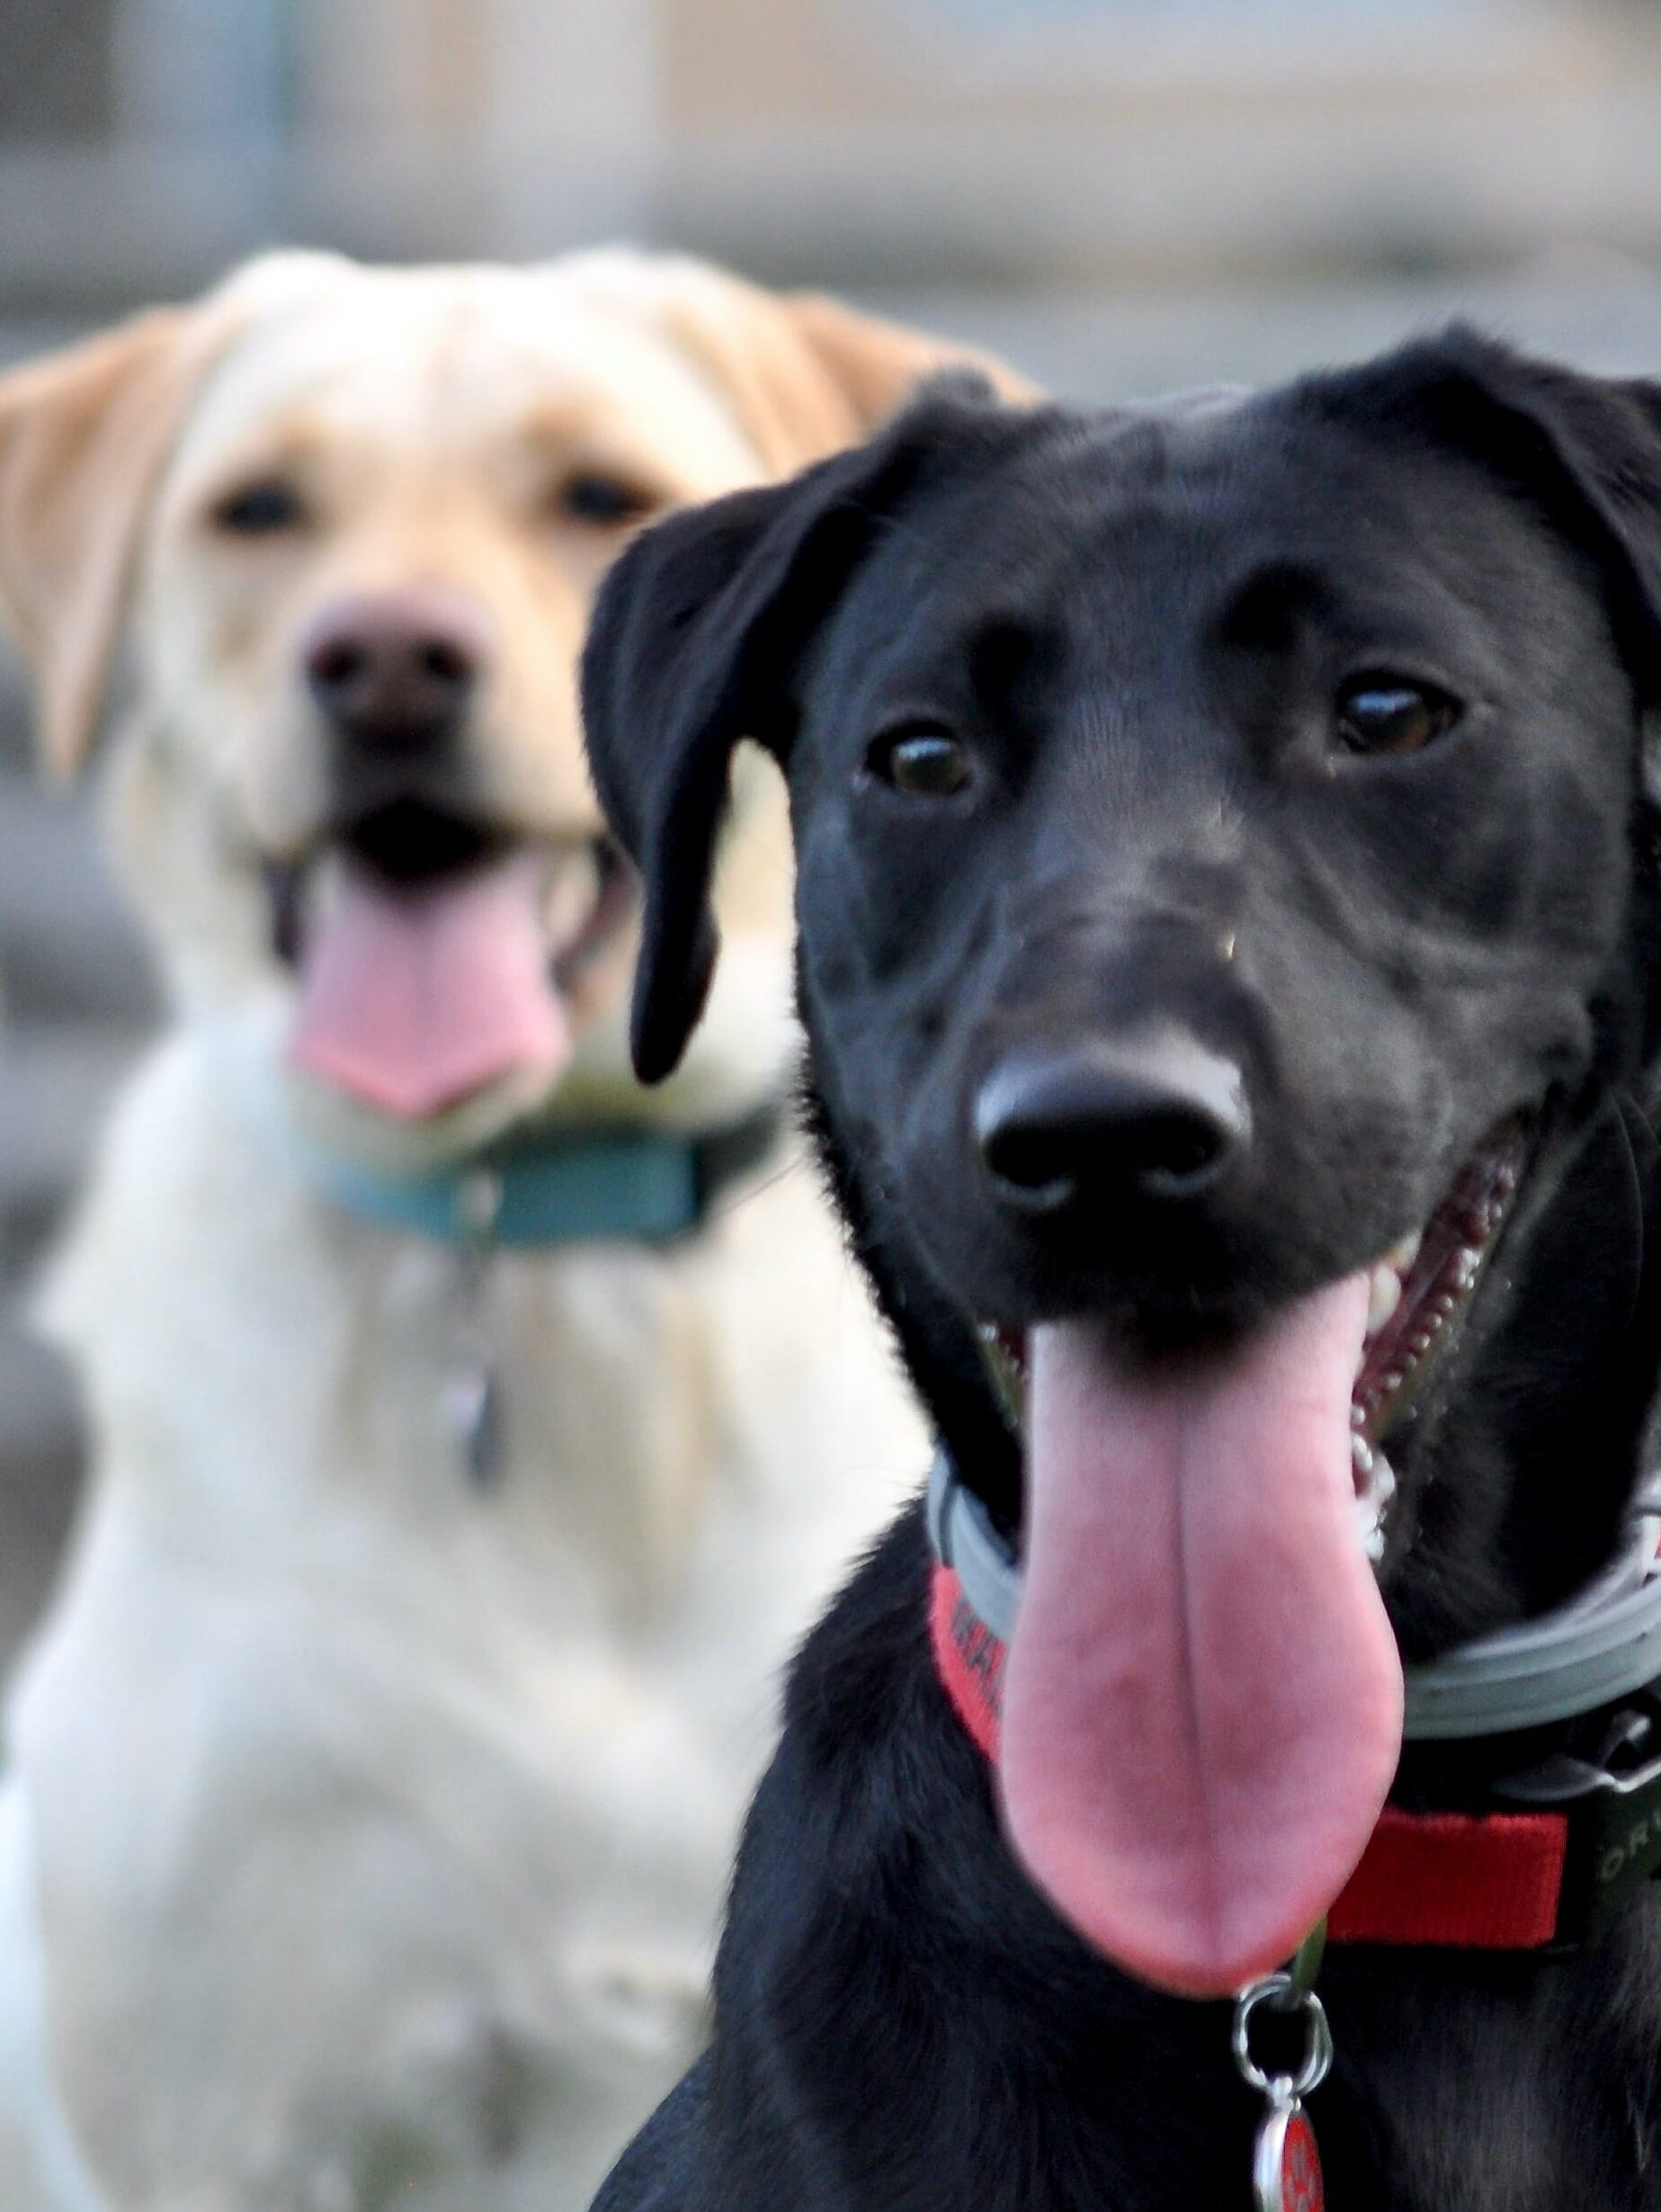 two labradors sitting one in front of the other for the camera. A yellow lab sits behind the black one, they both have their tongues hanging outu!